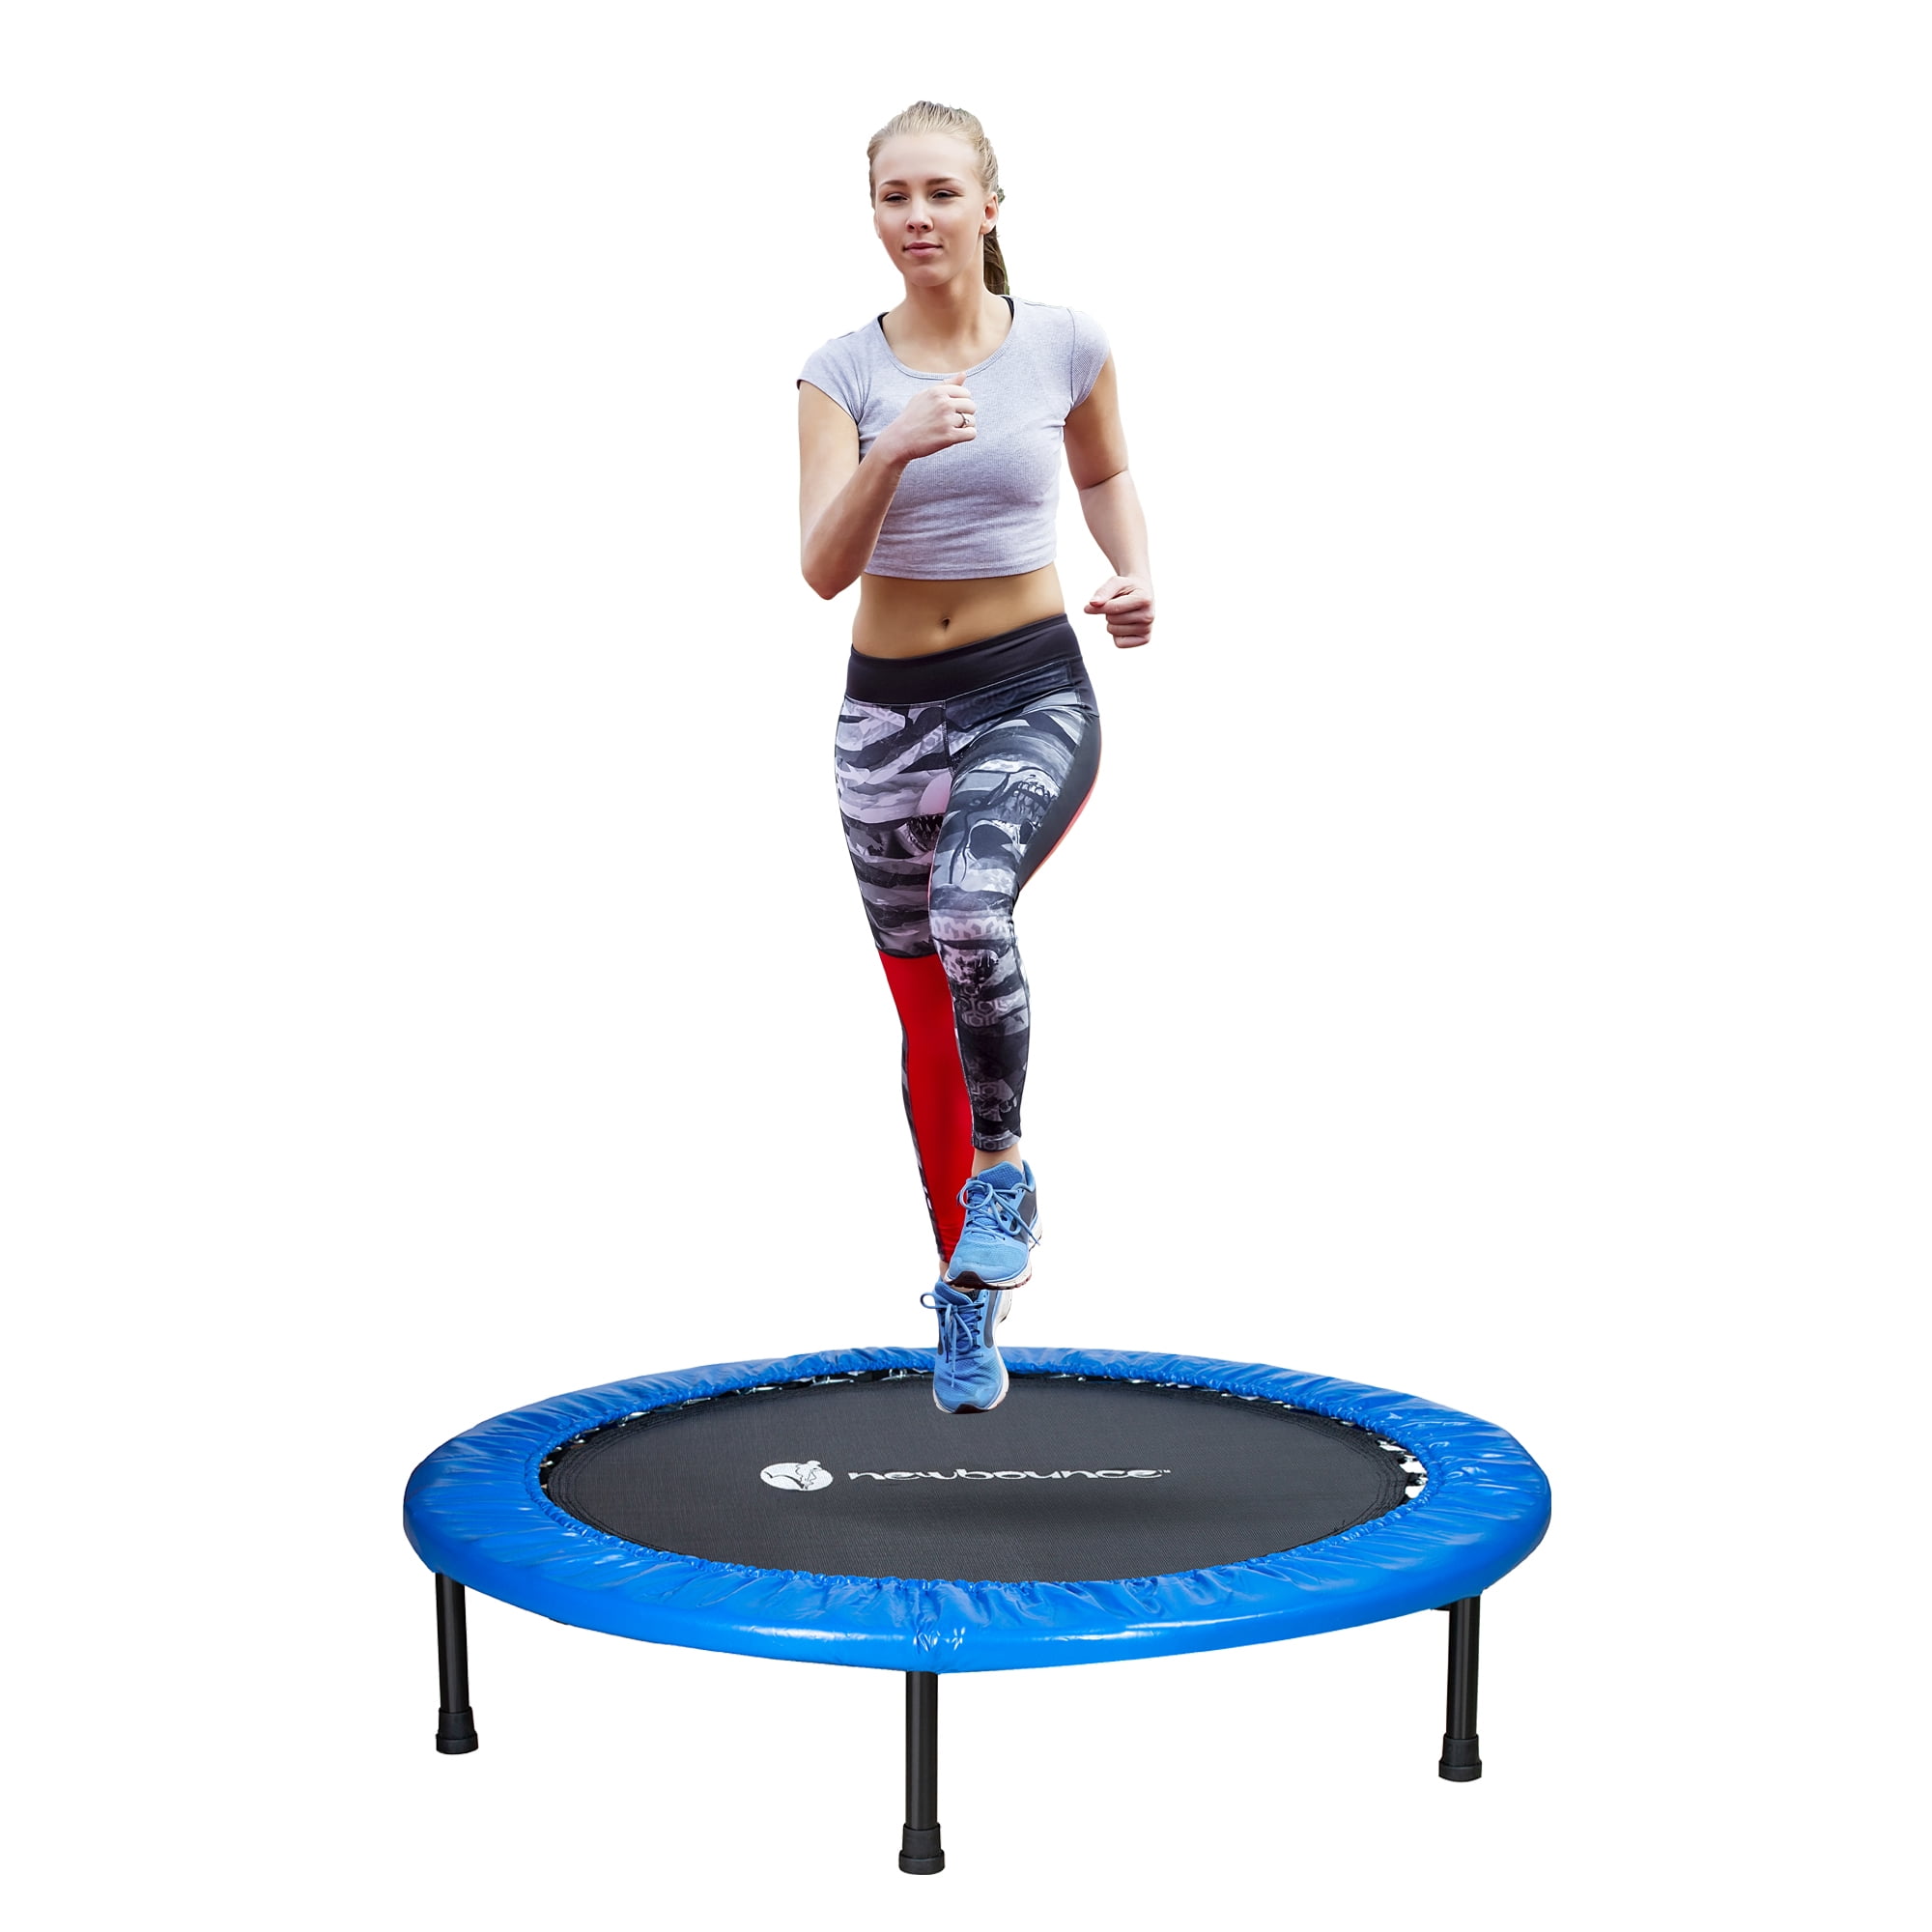 New Bounce Mini Trampoline - Foldable for Kids and - Walmart.com